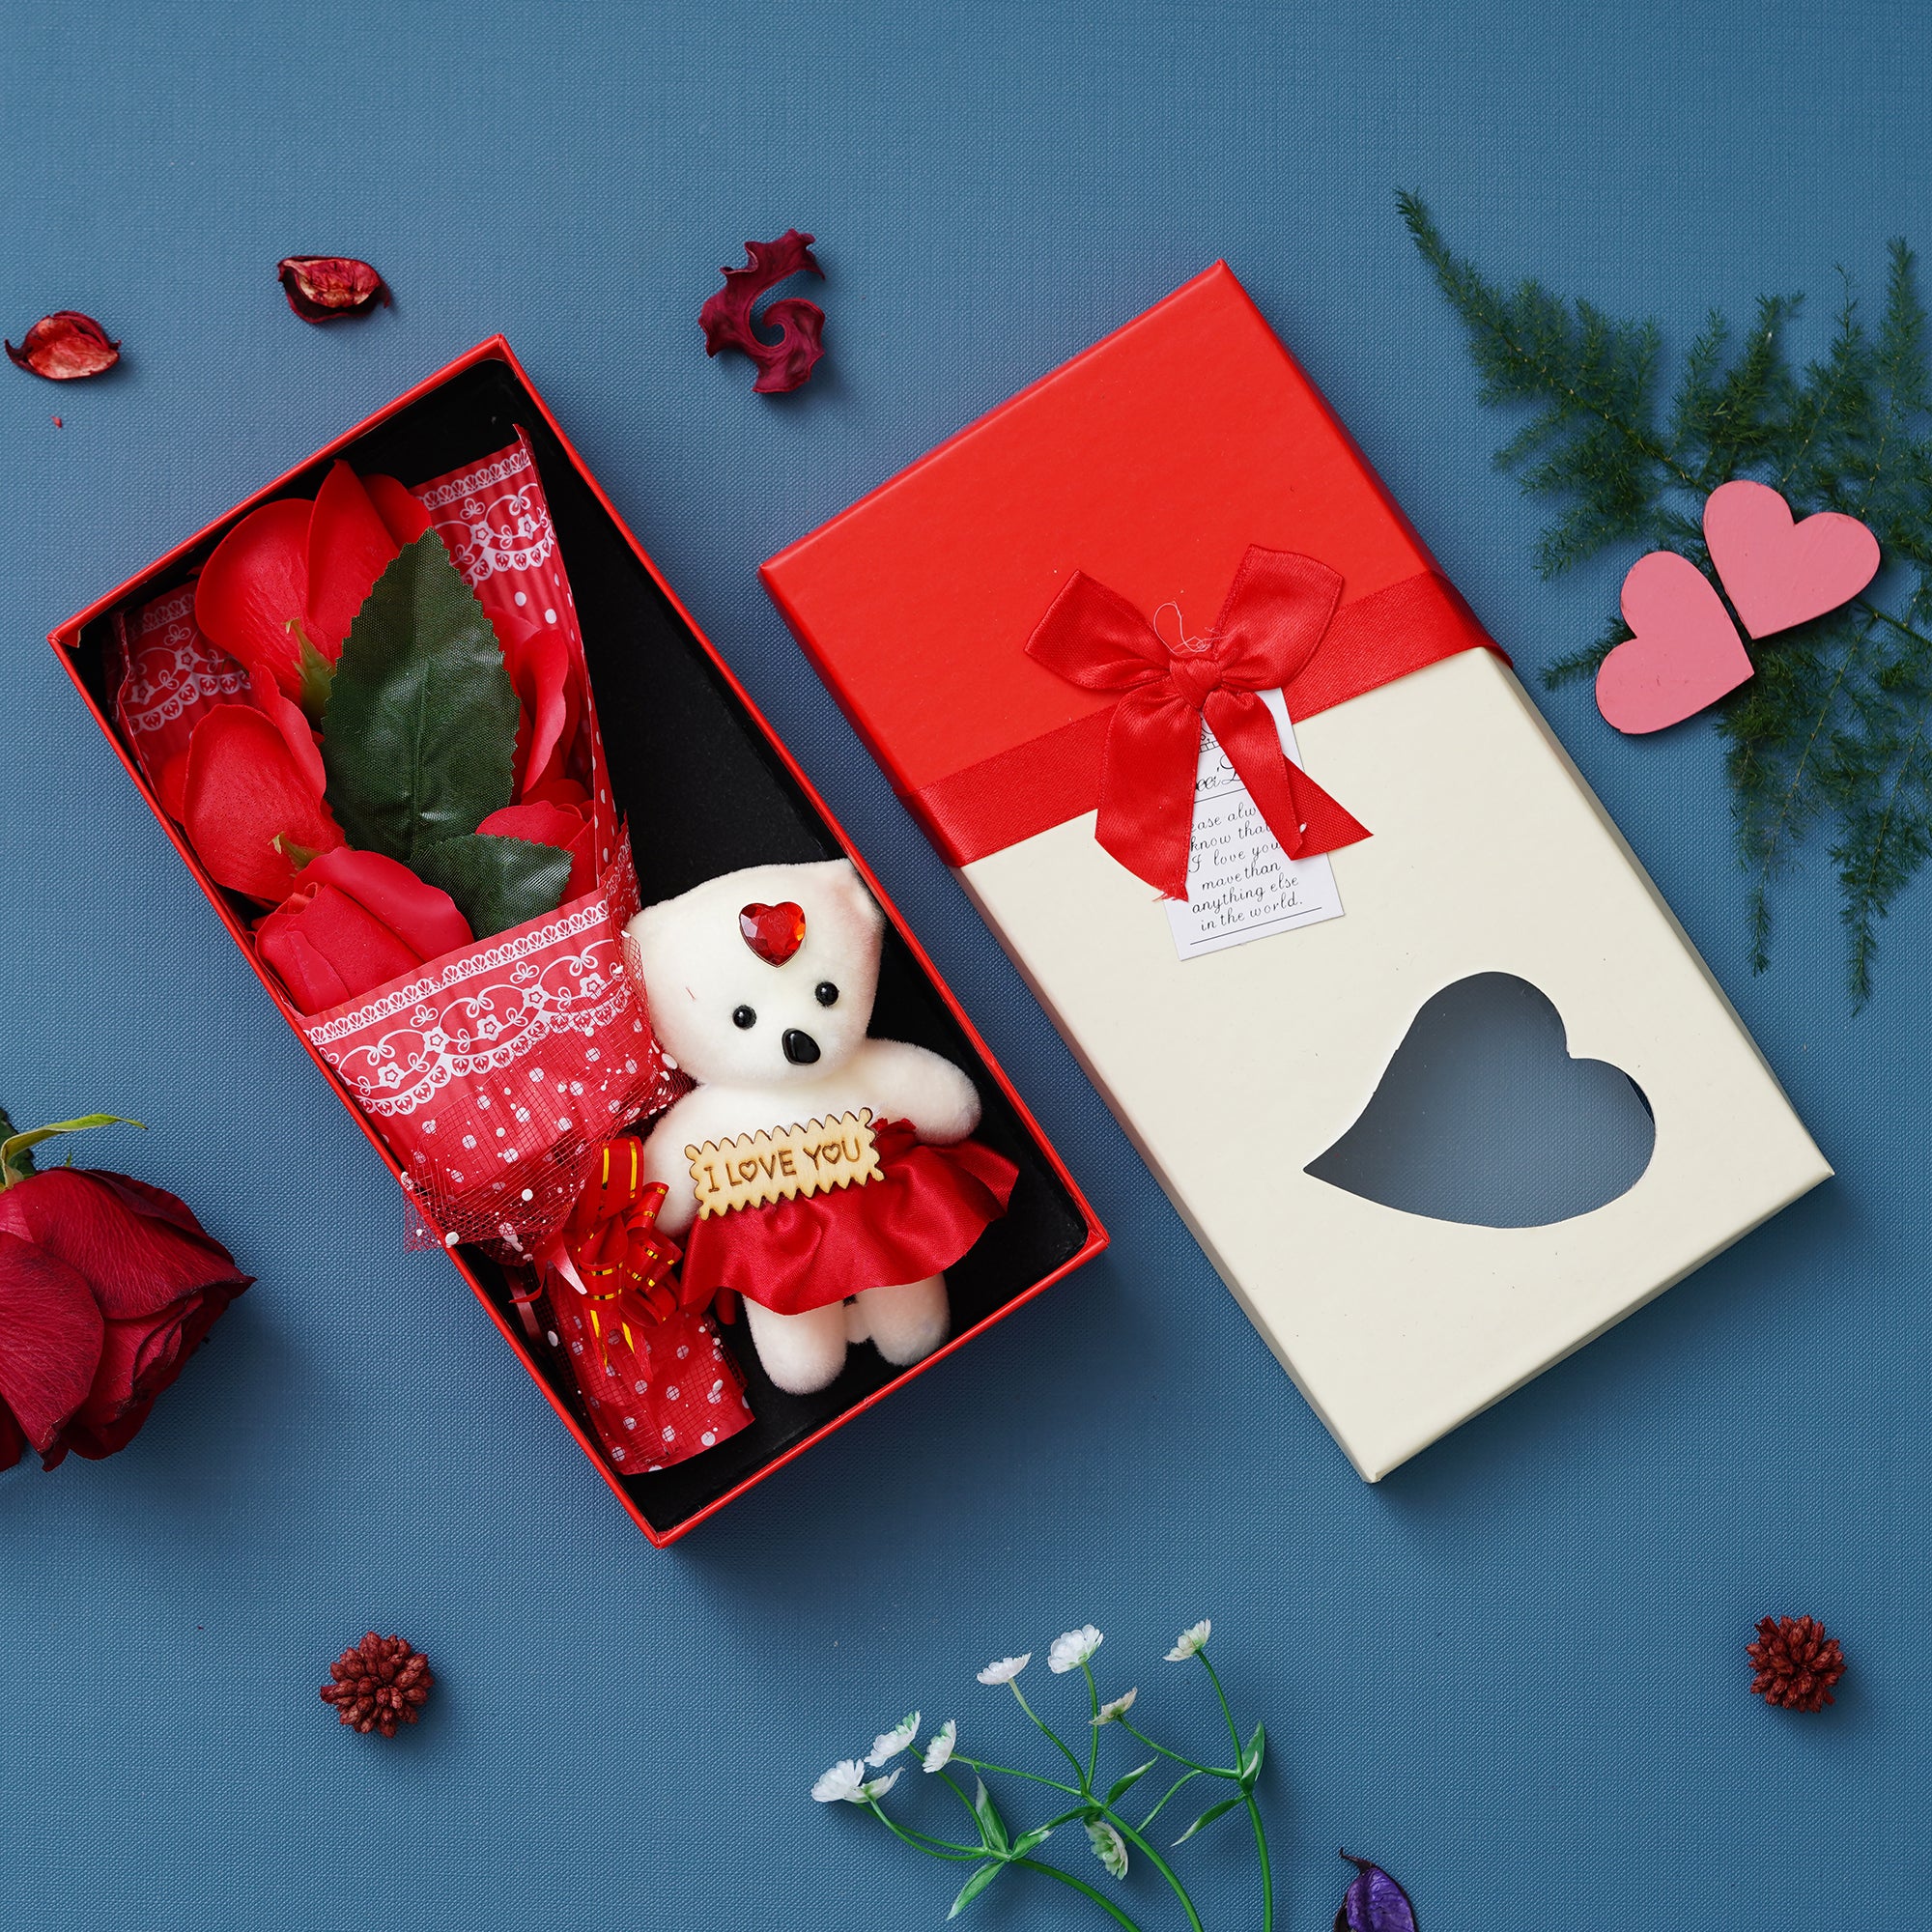 Valentine Combo of Pack of 8 Love Gift Cards, Red Roses Bouquet and White, Red Teddy Bear Valentine's Rectangle Shaped Gift Box, Red Message Bottle Wooden Box Set 3